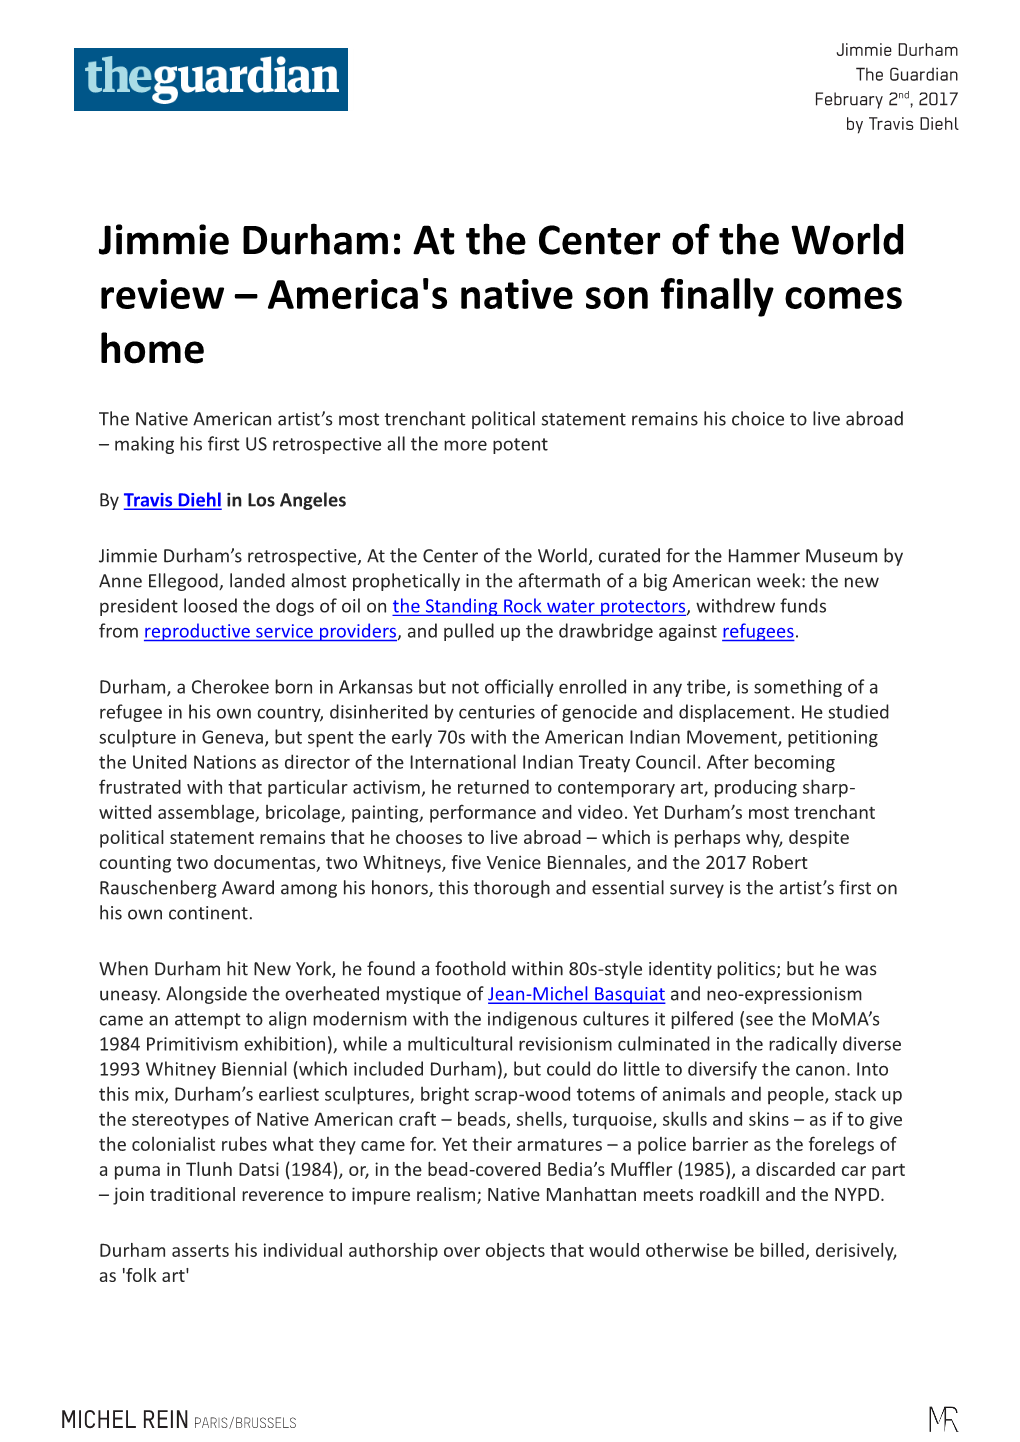 Jimmie Durham: at the Center of the World Review – America's Native Son Finally Comes Homejimmie Durham: at the Center of the World